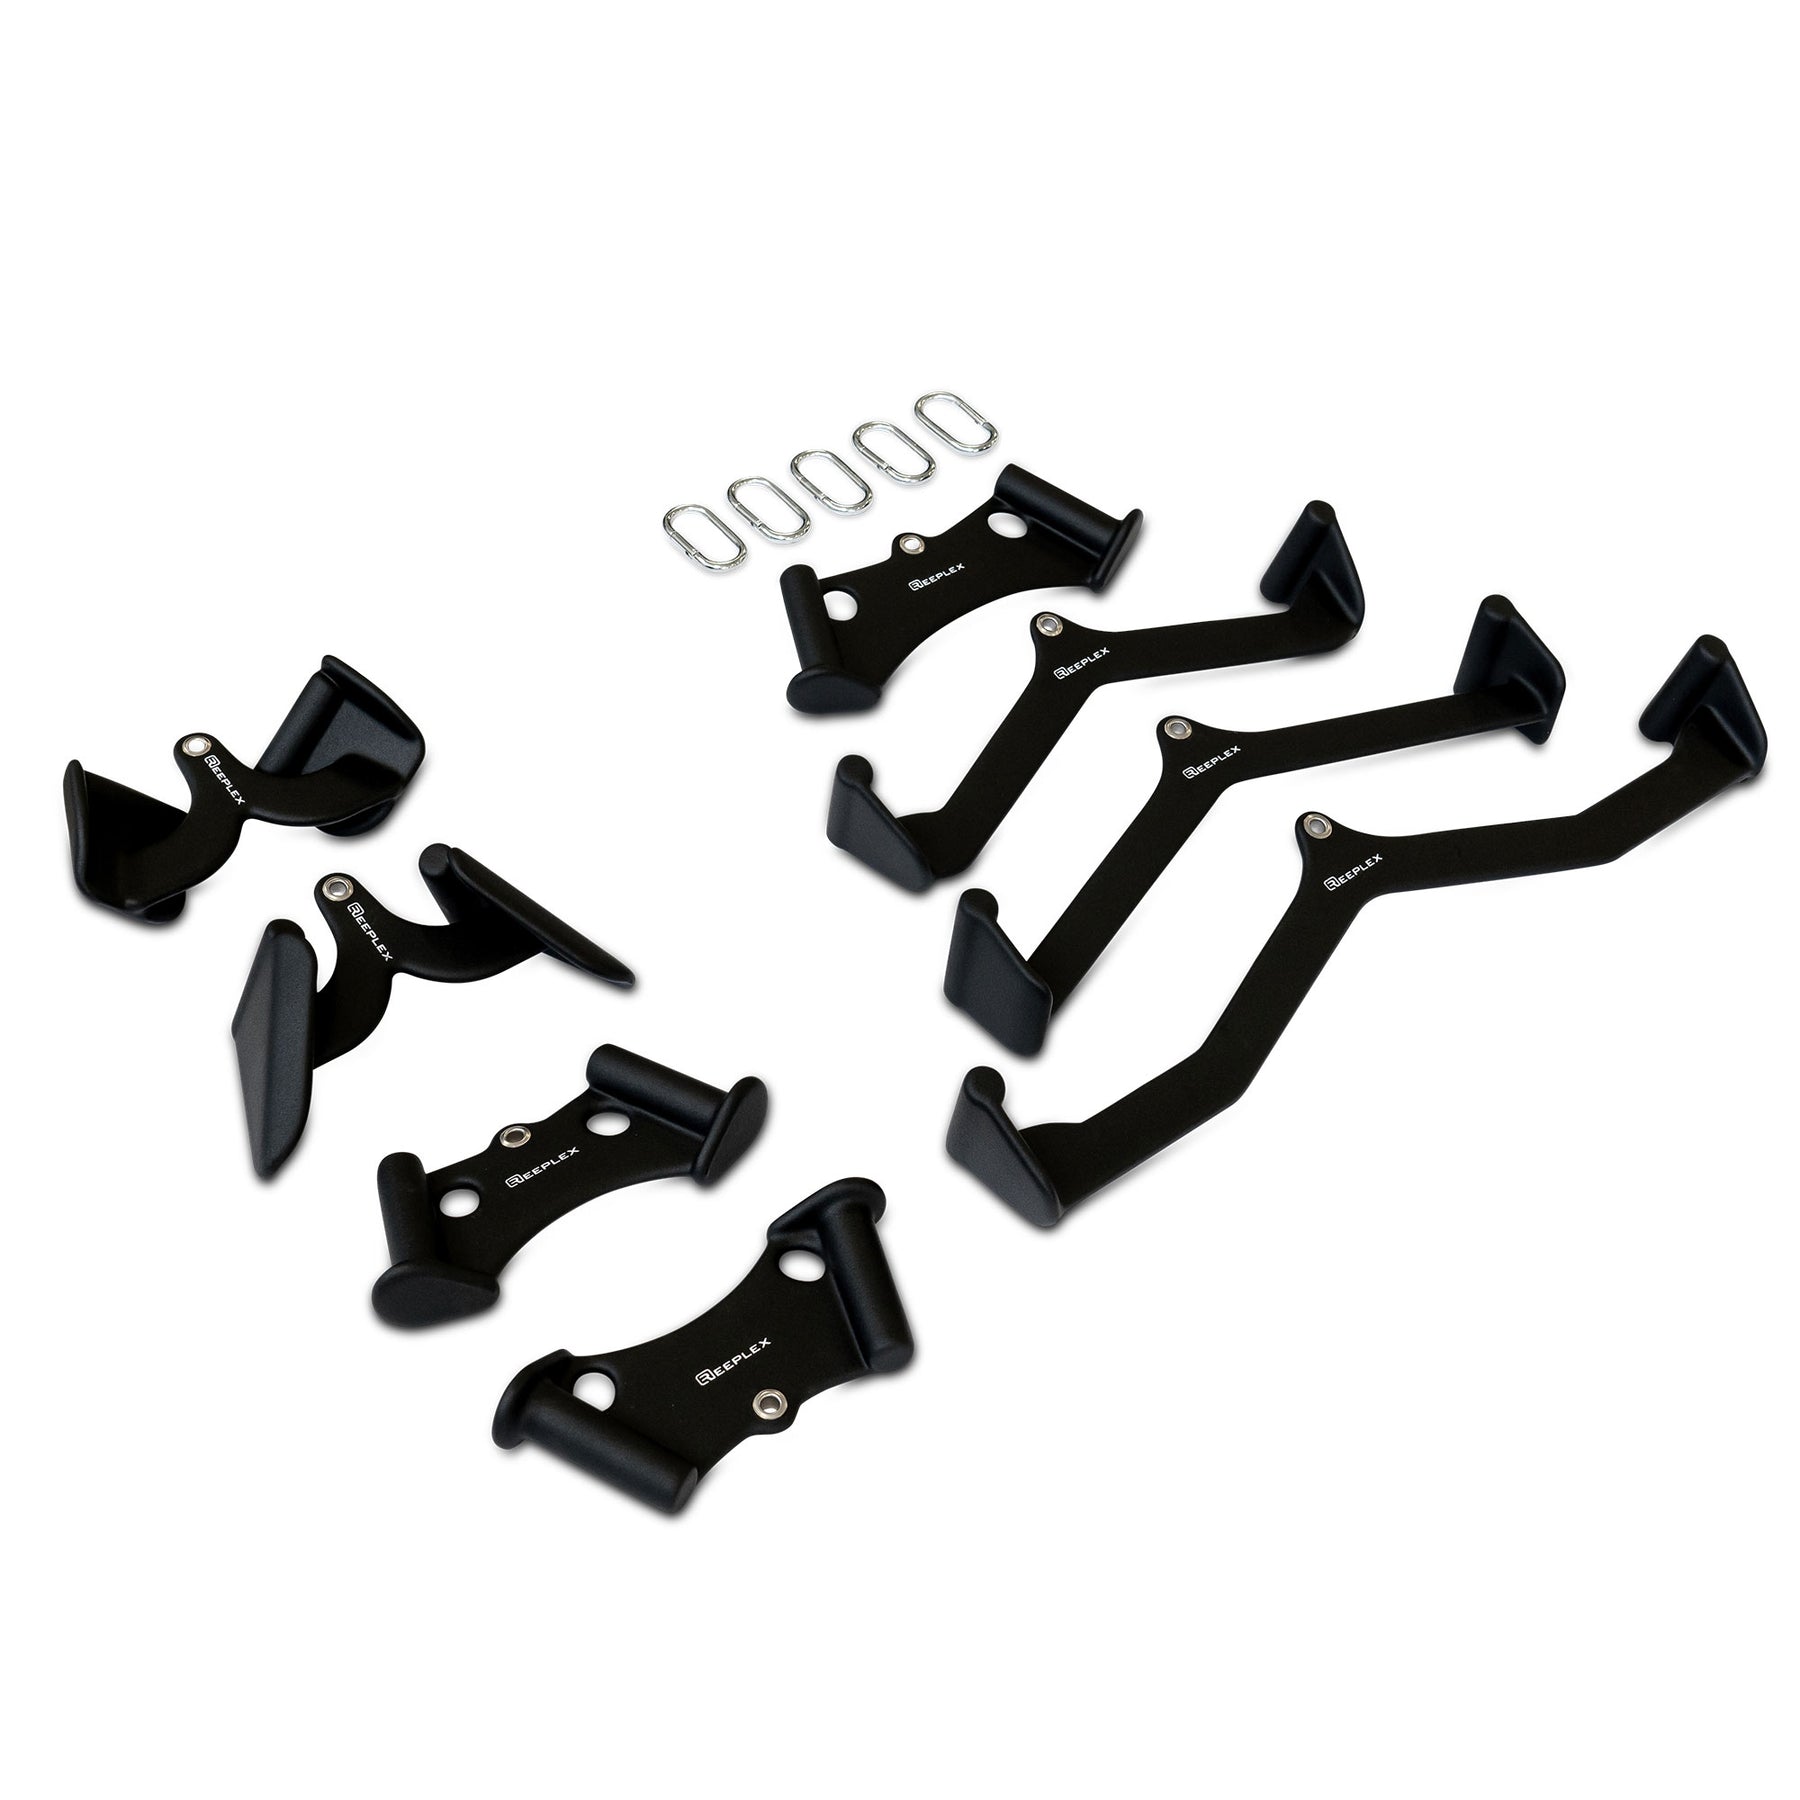 Neo mag grip 8 piece attachment set with caribiners